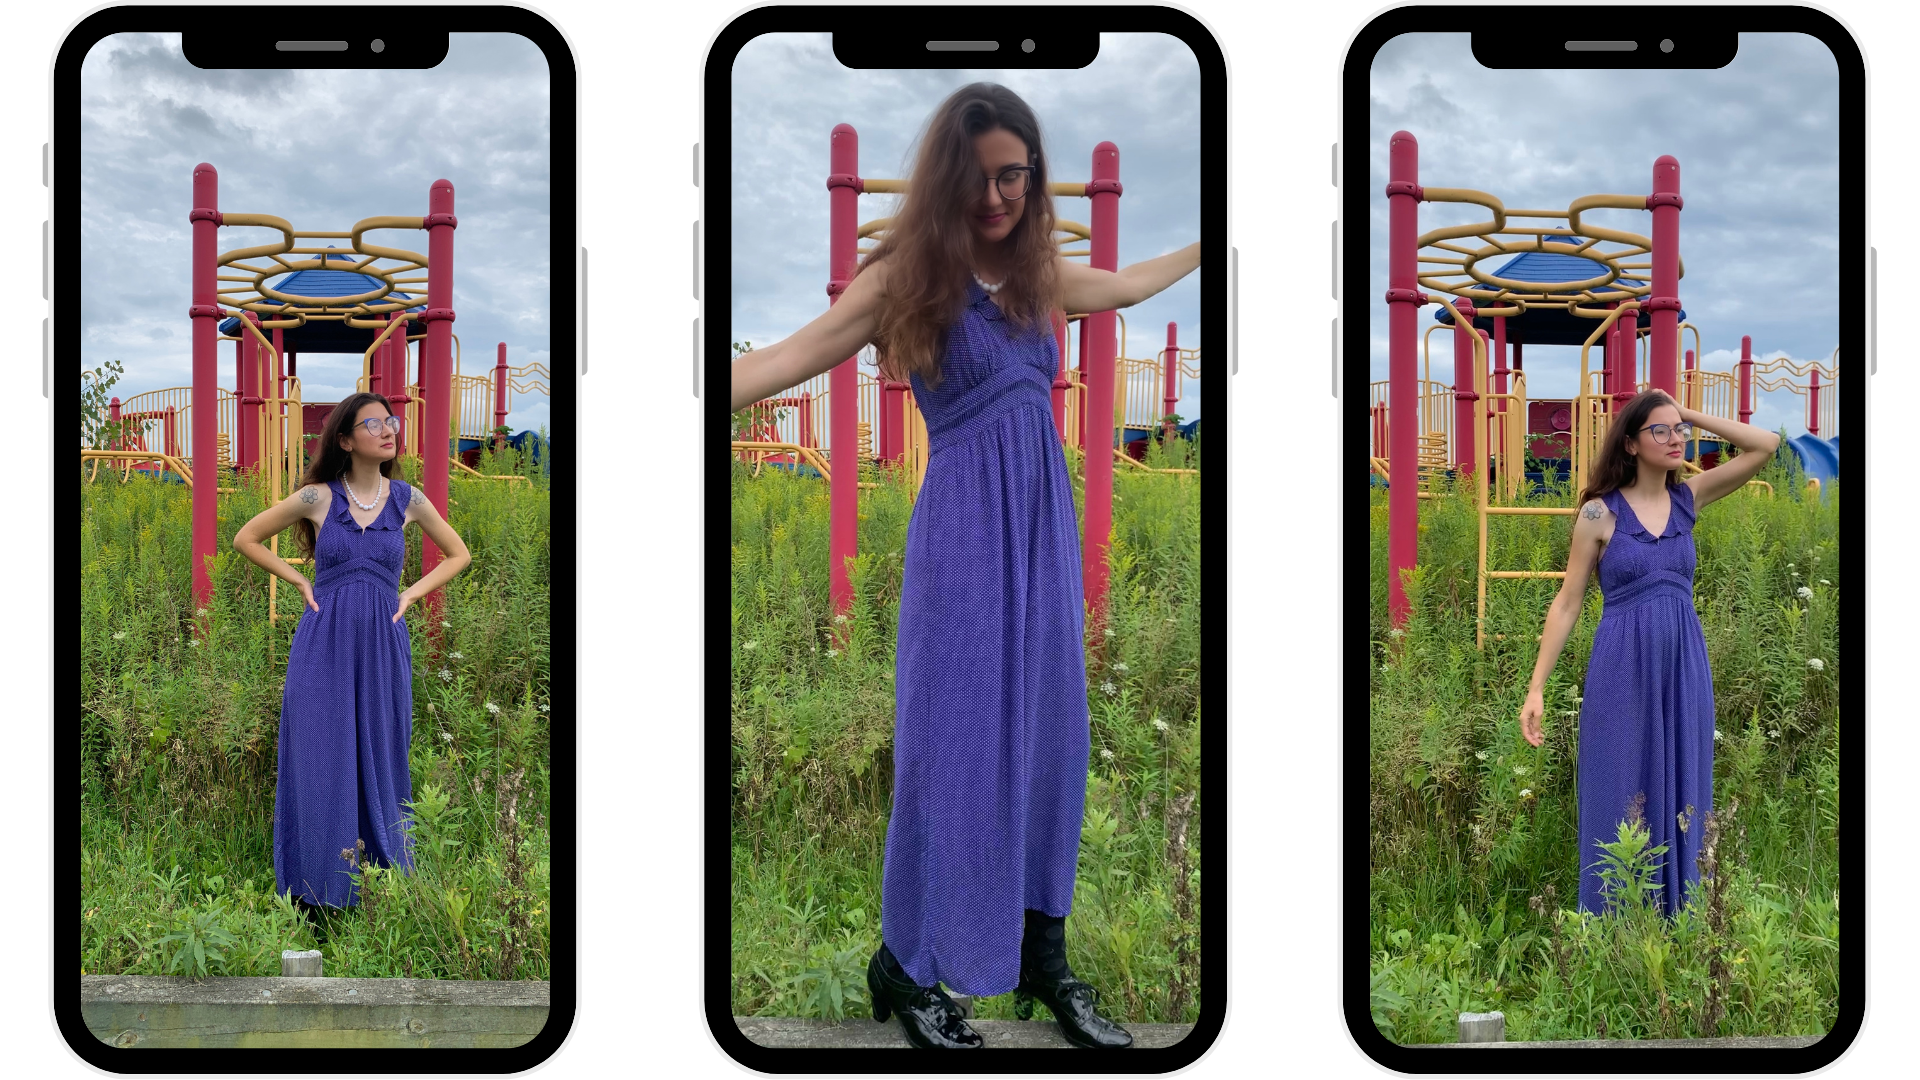 images of a woman wearing a blue jumpsuit with tiny white polka dots in front of an abandoned playground on a cloudy day